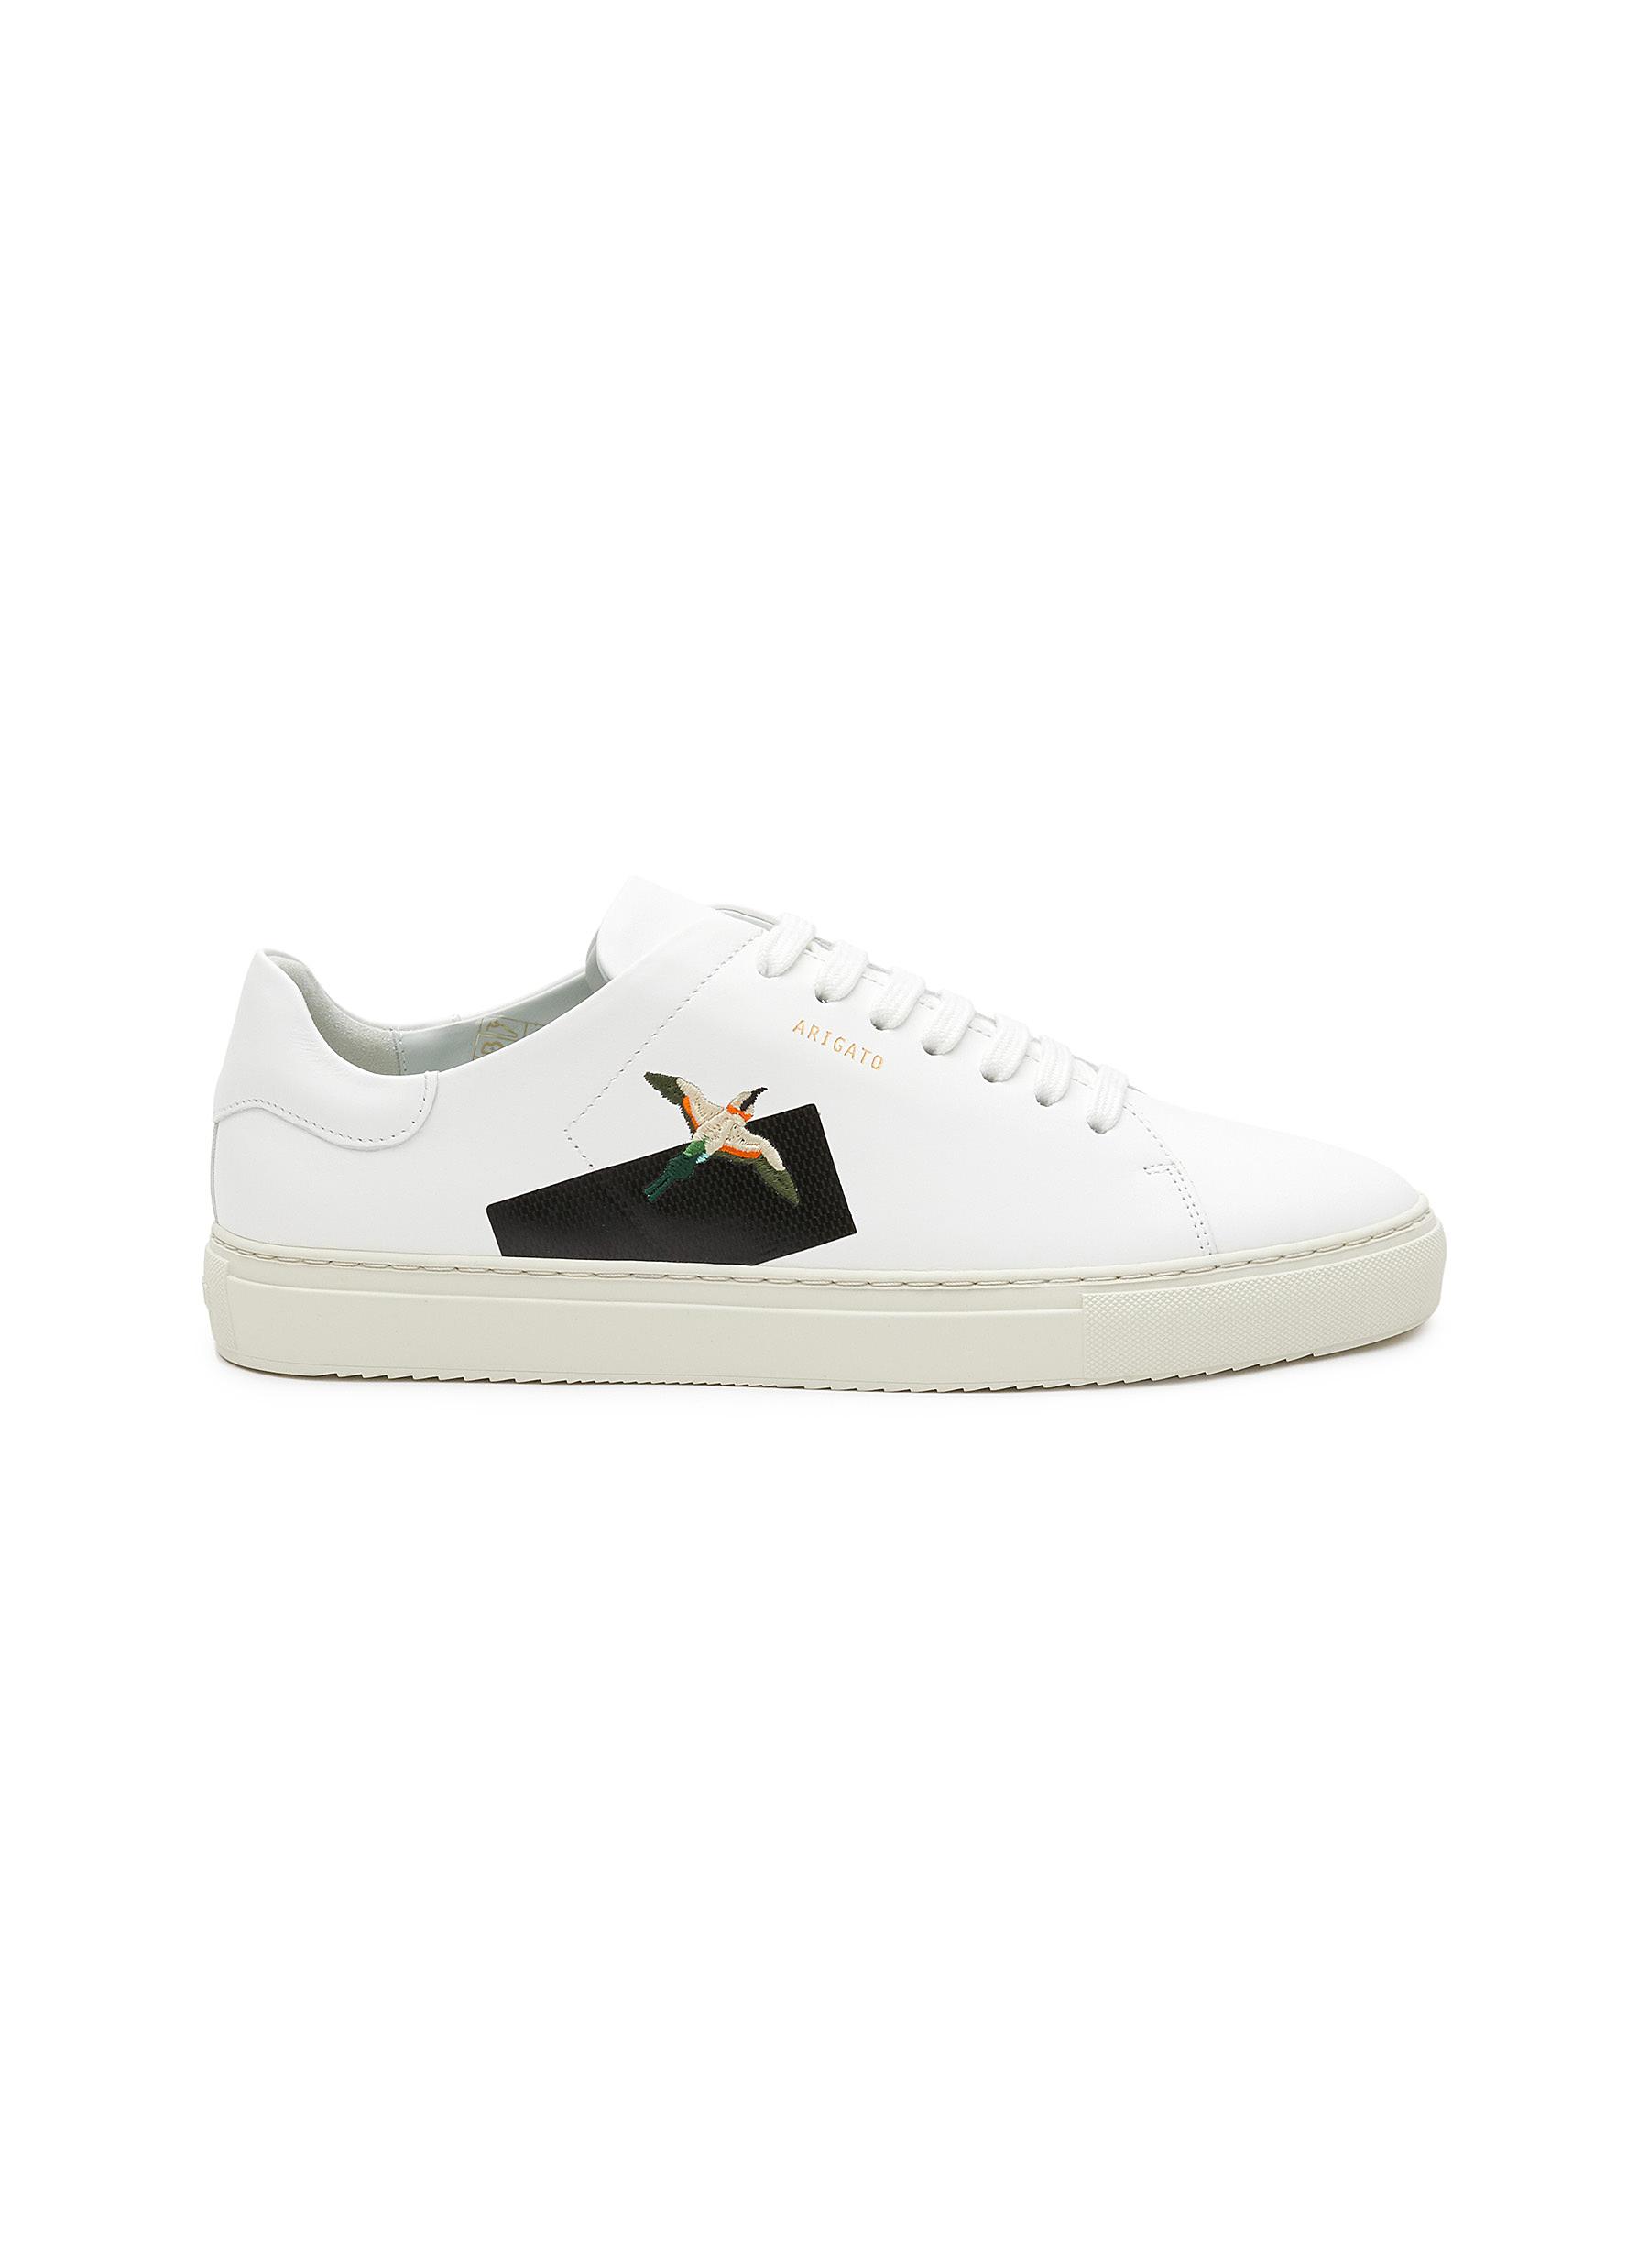 Clean 90' Bird Embroidery Low Top Leather Sneakers